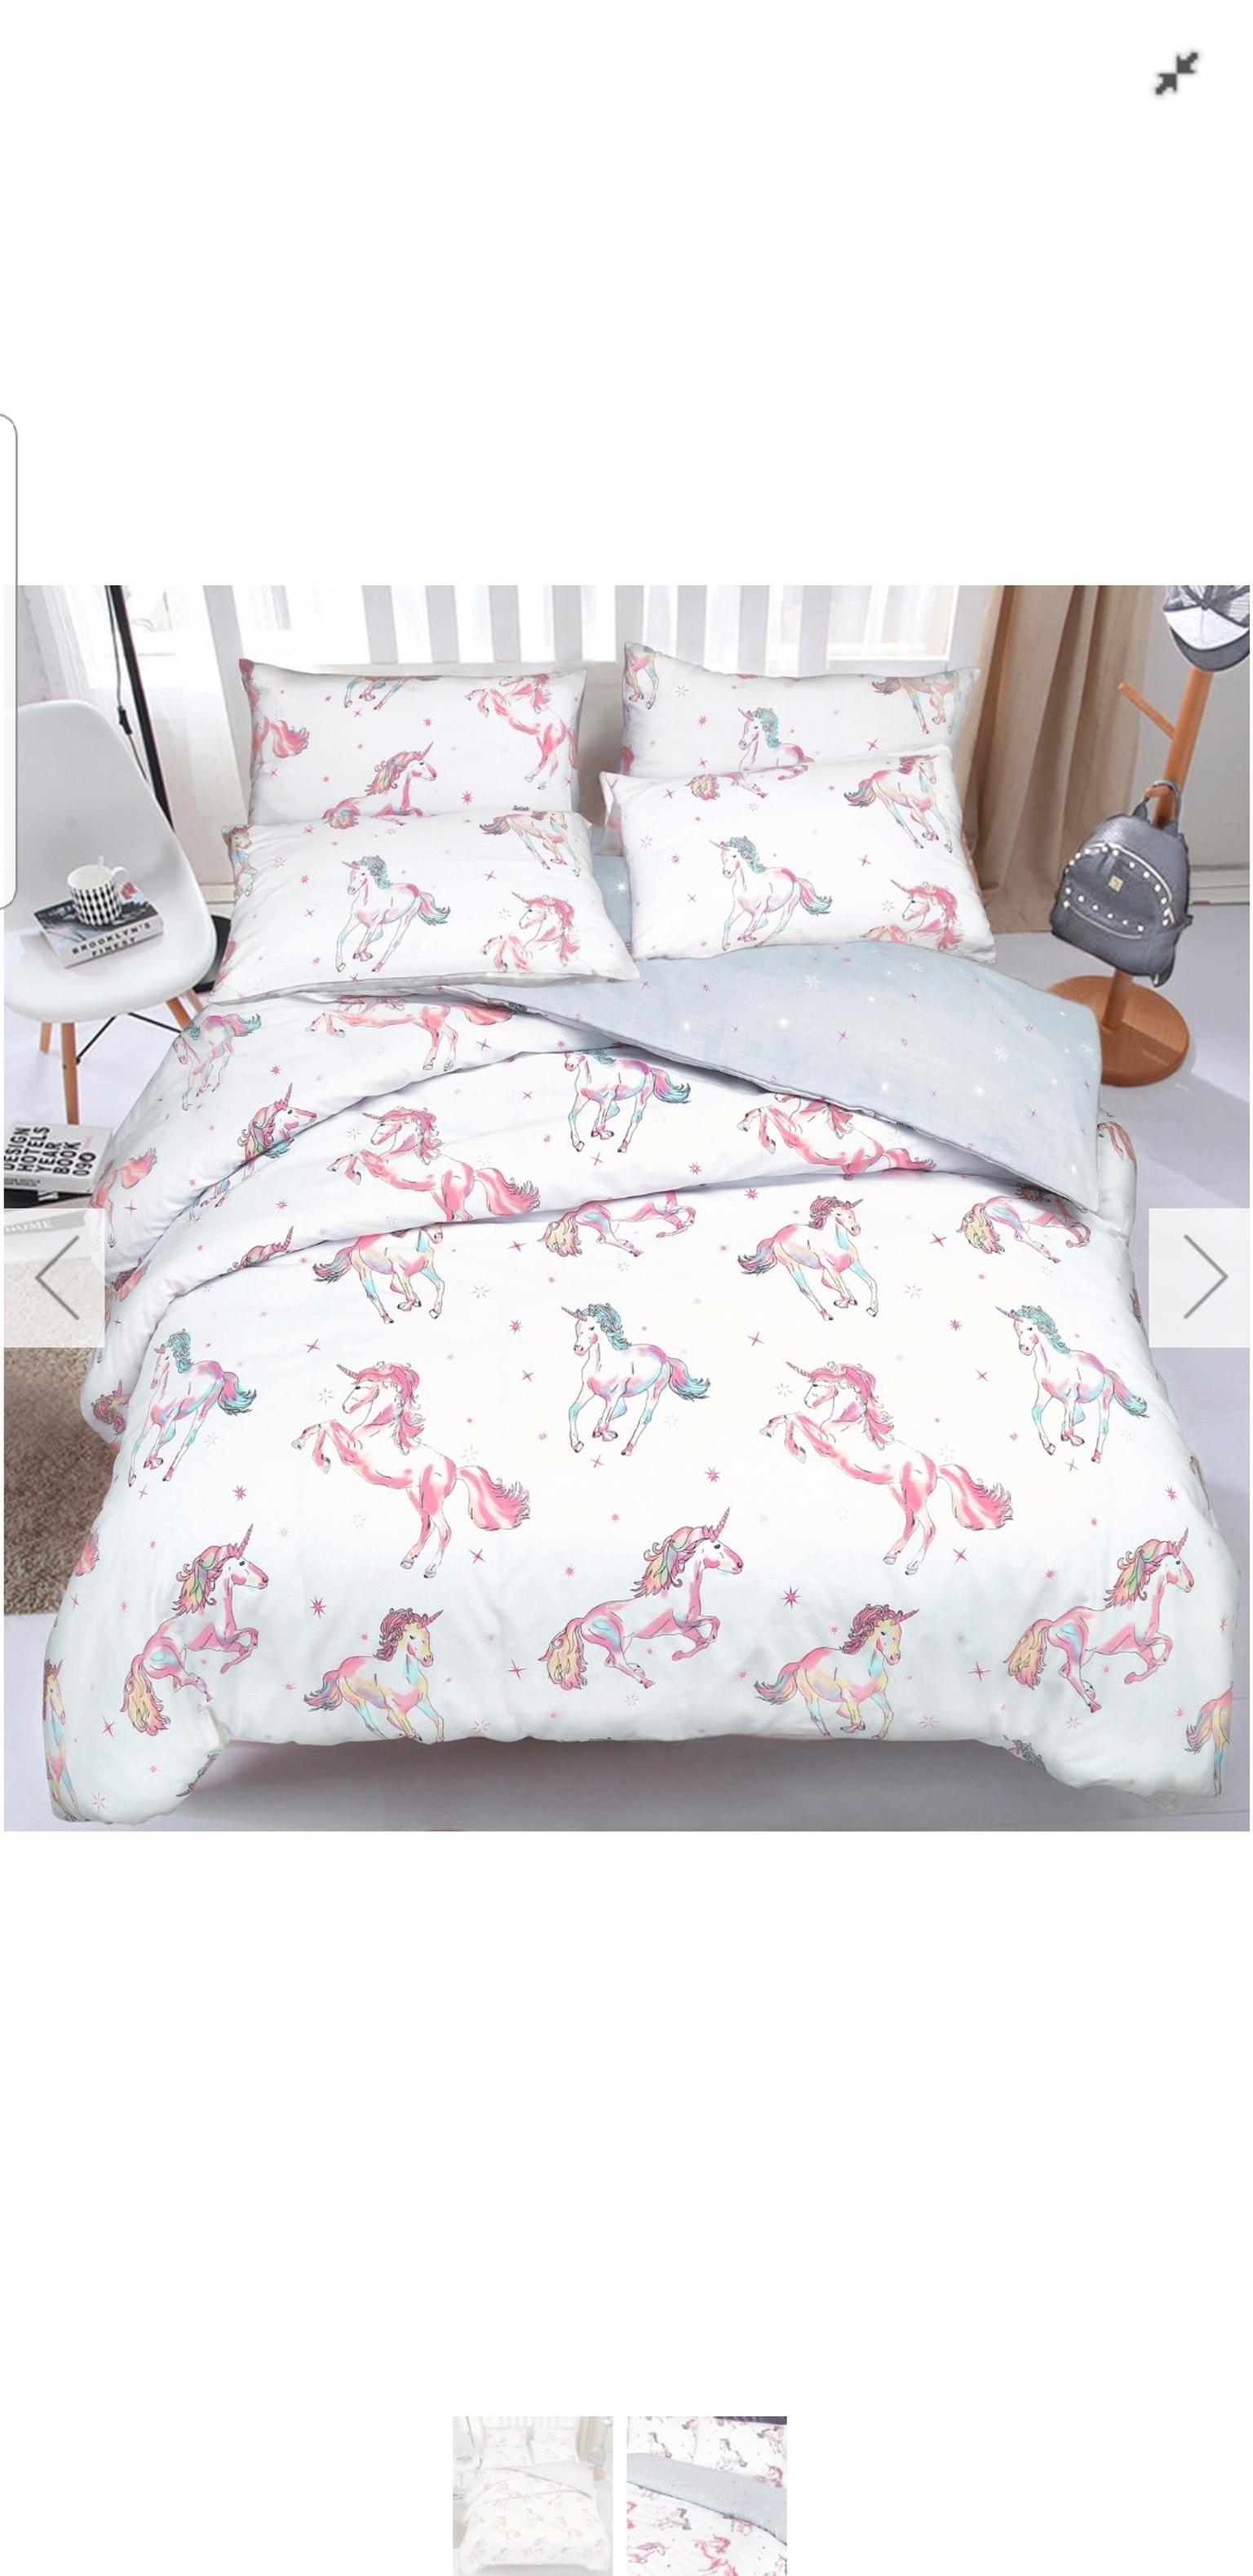 Unicorn Duvet Cover Double Bed In Np20 Newport For 15 00 For